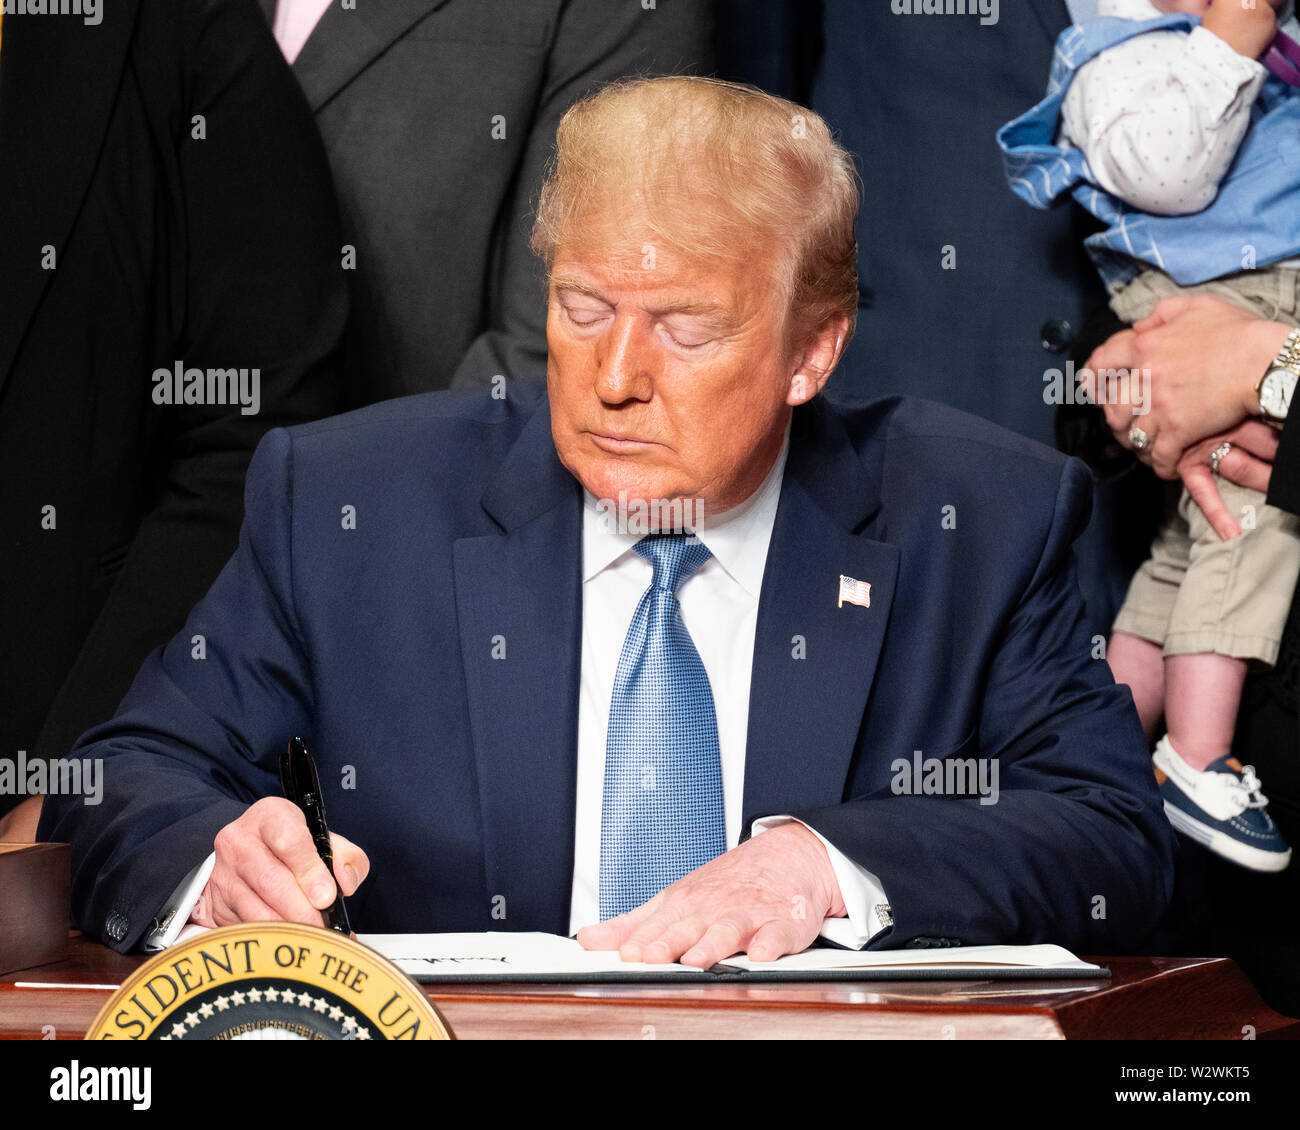 Washington, United States. 10th July, 2019. President Donald Trump signs an Executive Order to Advance Kidney Health at the Ronald Reagan Building and International Trade Center in Washington, DC. Credit: SOPA Images Limited/Alamy Live News Stock Photo